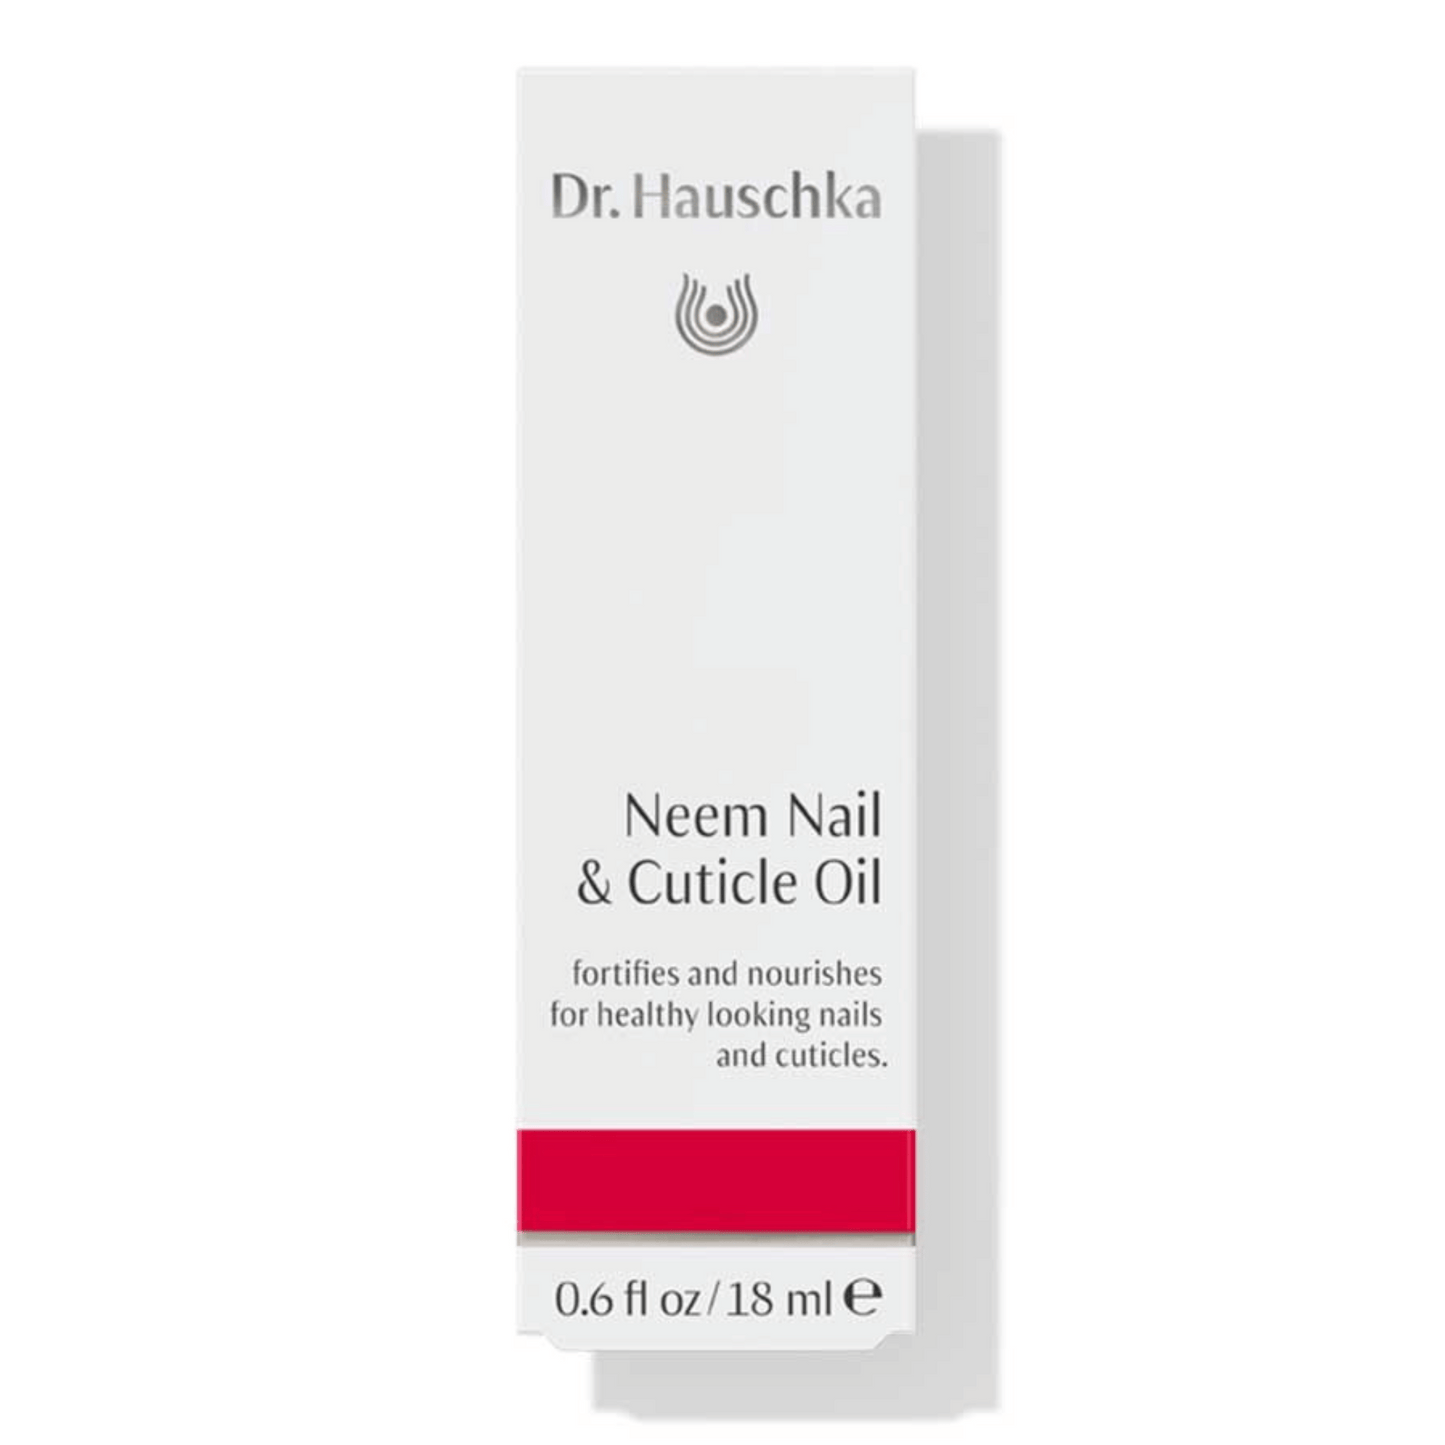 Alternate Image of Neem Nail and Cuticle Oil